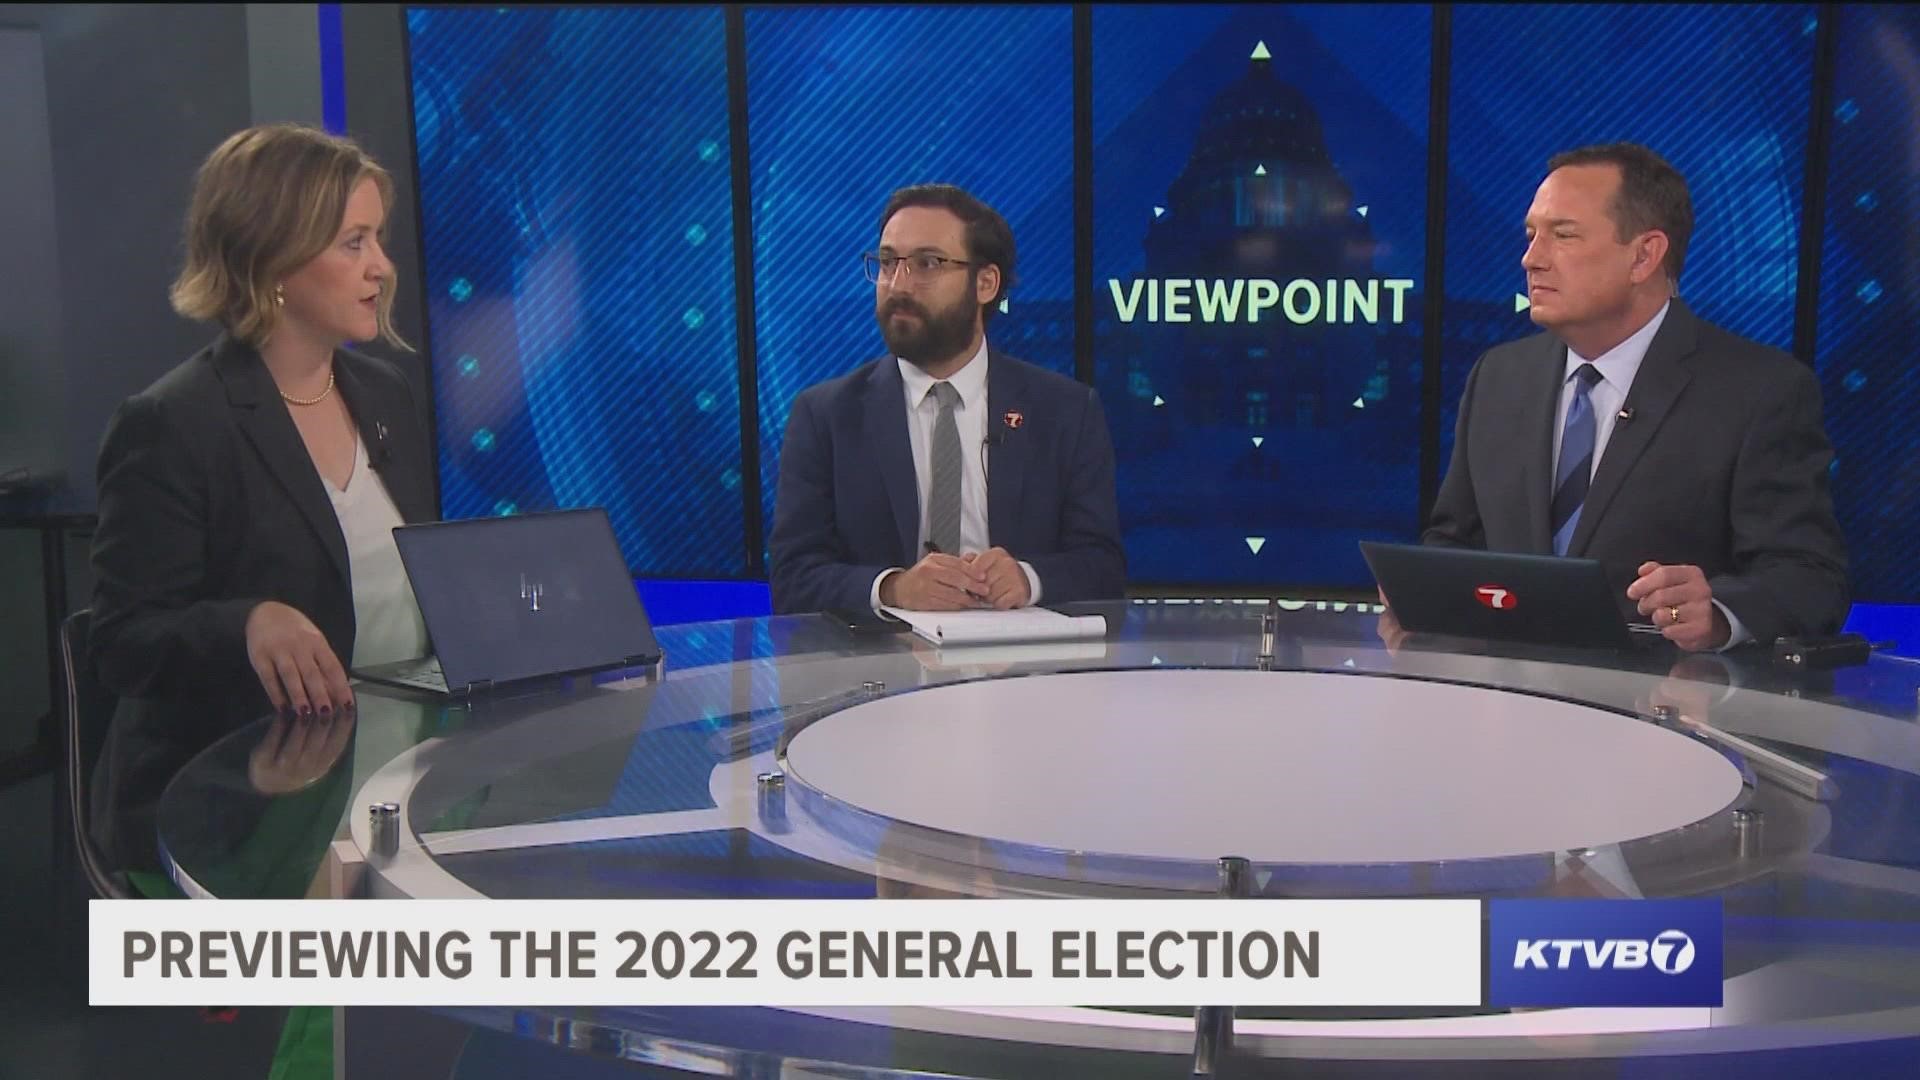 On this week's episode of Viewpoint, Idaho Public Television's Melissa Davlin joins Doug Petcash and Joe Parris to discuss the upcoming general election.